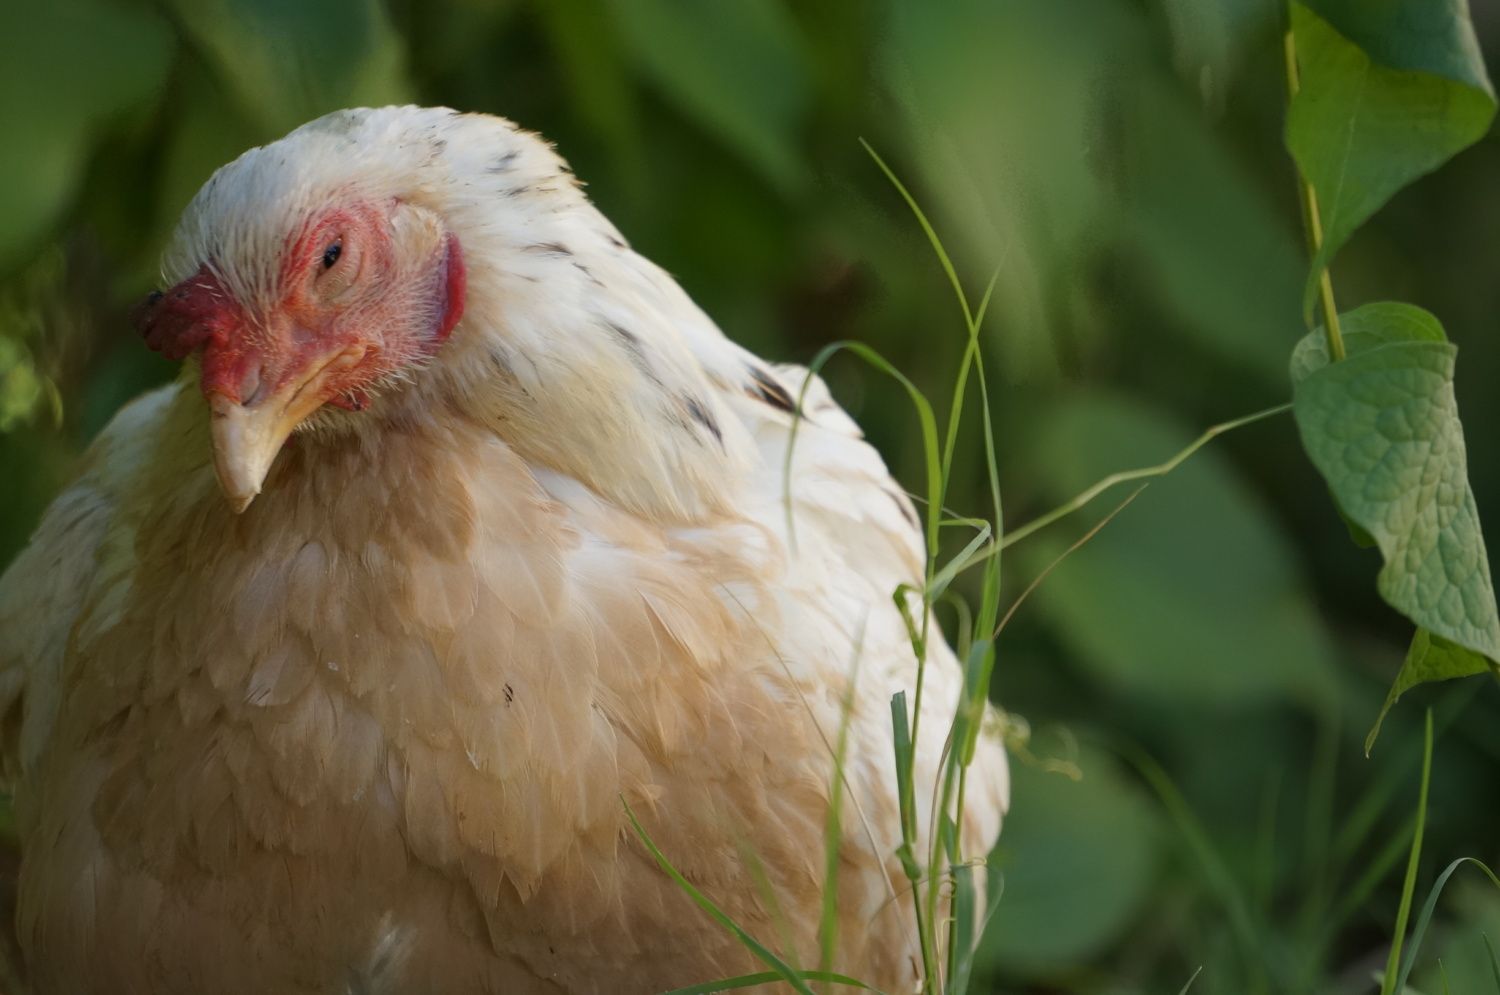 Wry neck - Causes, treatment and prevention.  BackYard Chickens - Learn How  to Raise Chickens